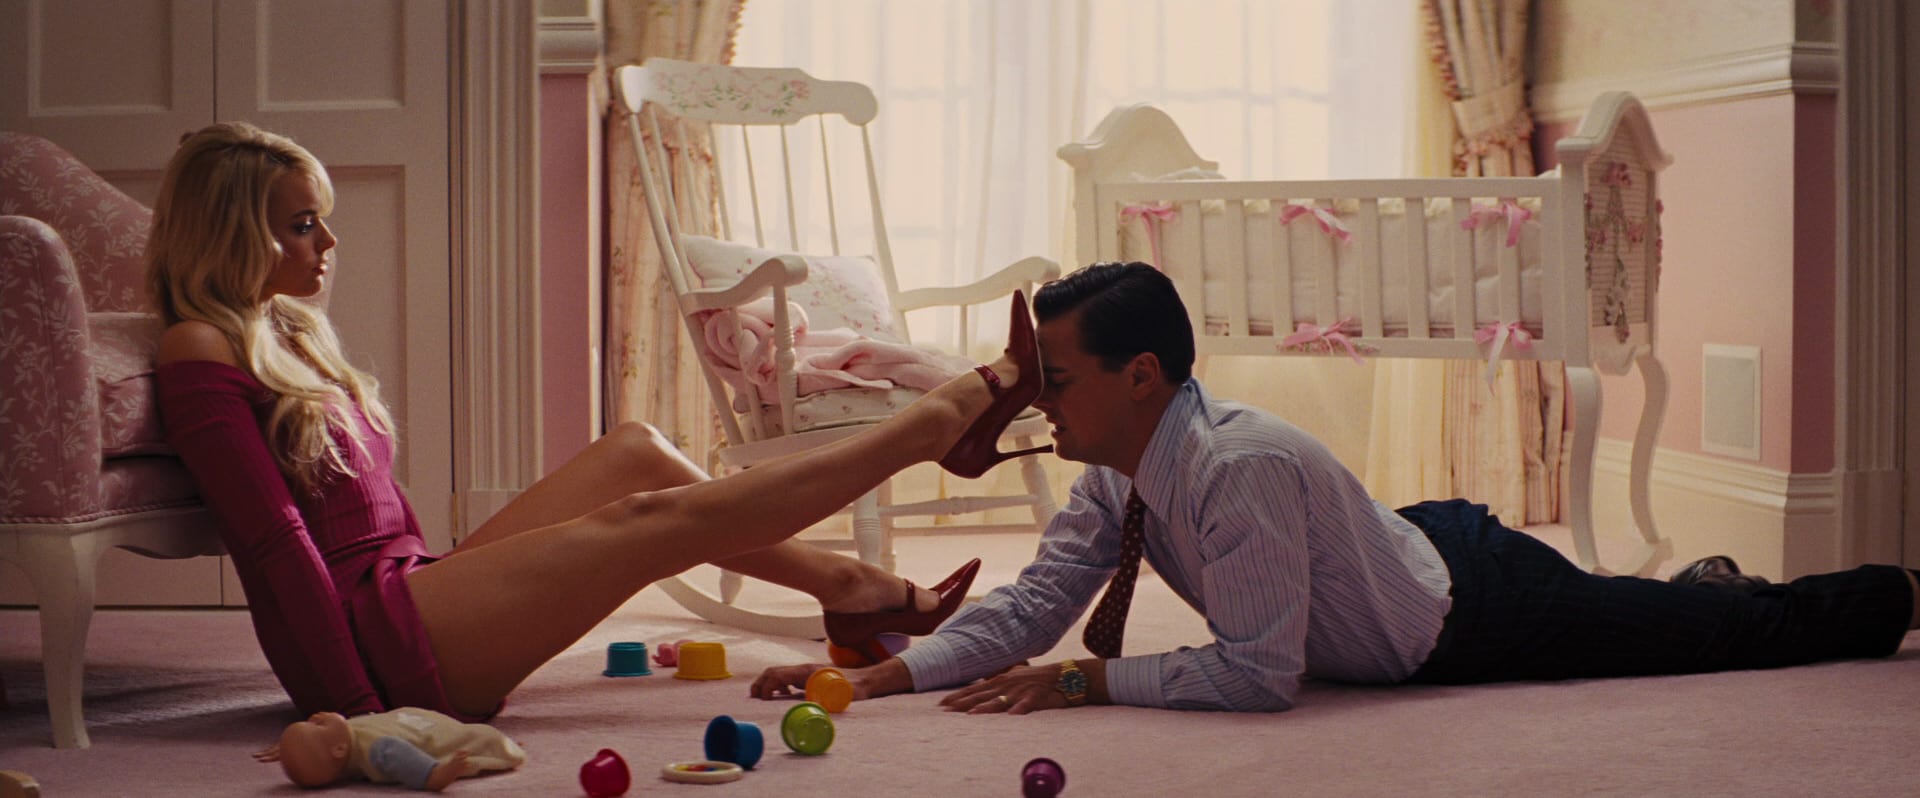 Best of The wolf of wall street naked